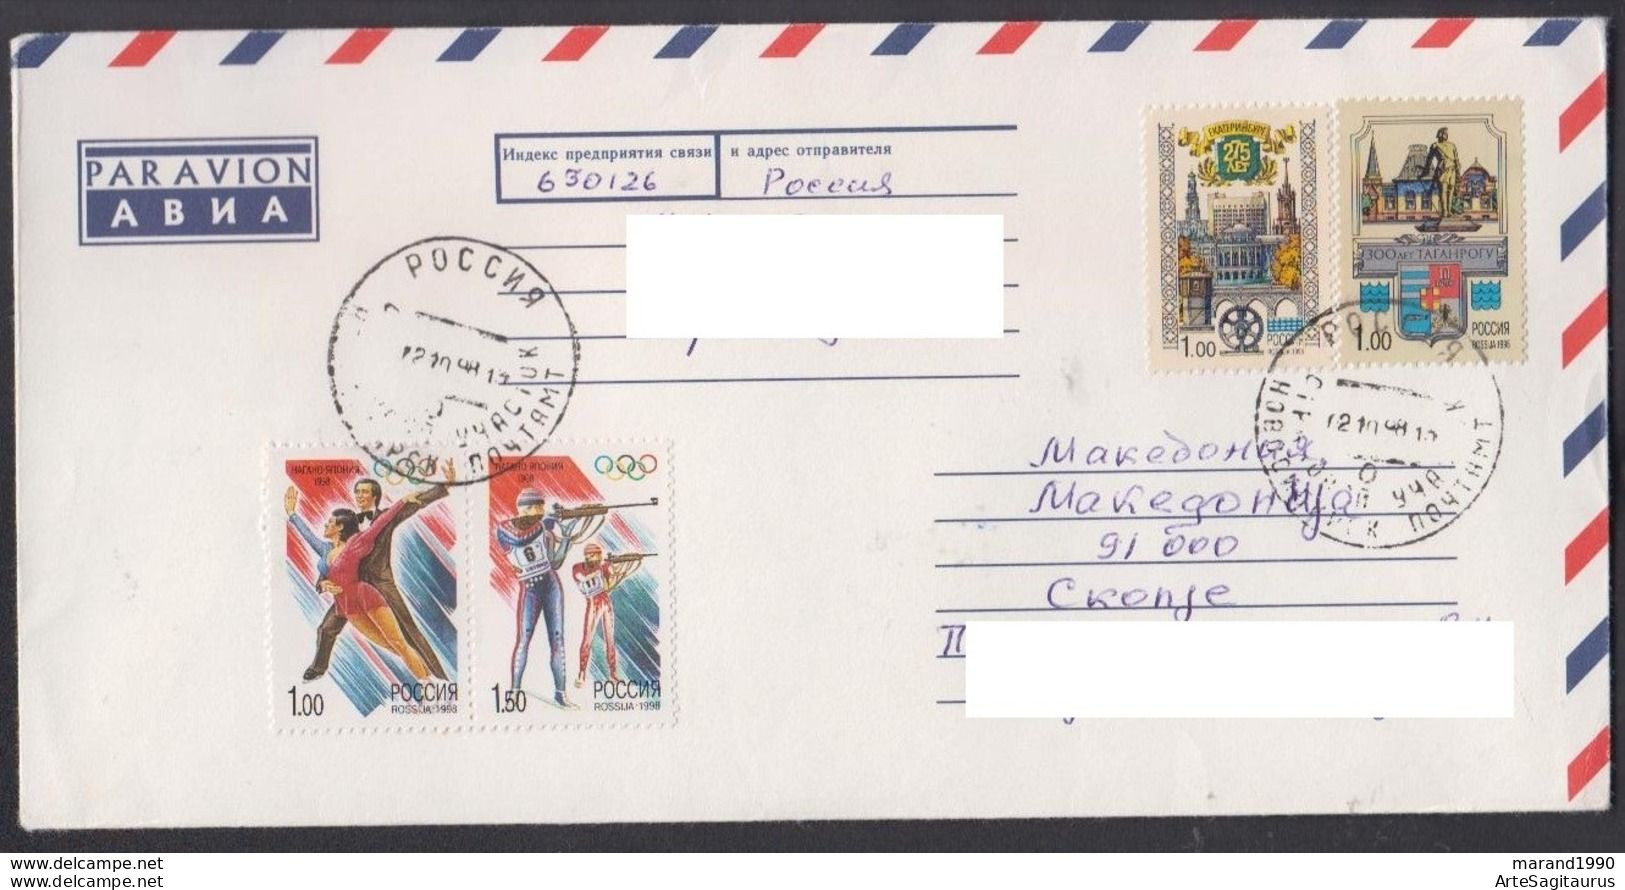 ROSSIA COVER SPORT AIR MAIL REPUBLIC OF MACEDONIA (006) - Lettres & Documents